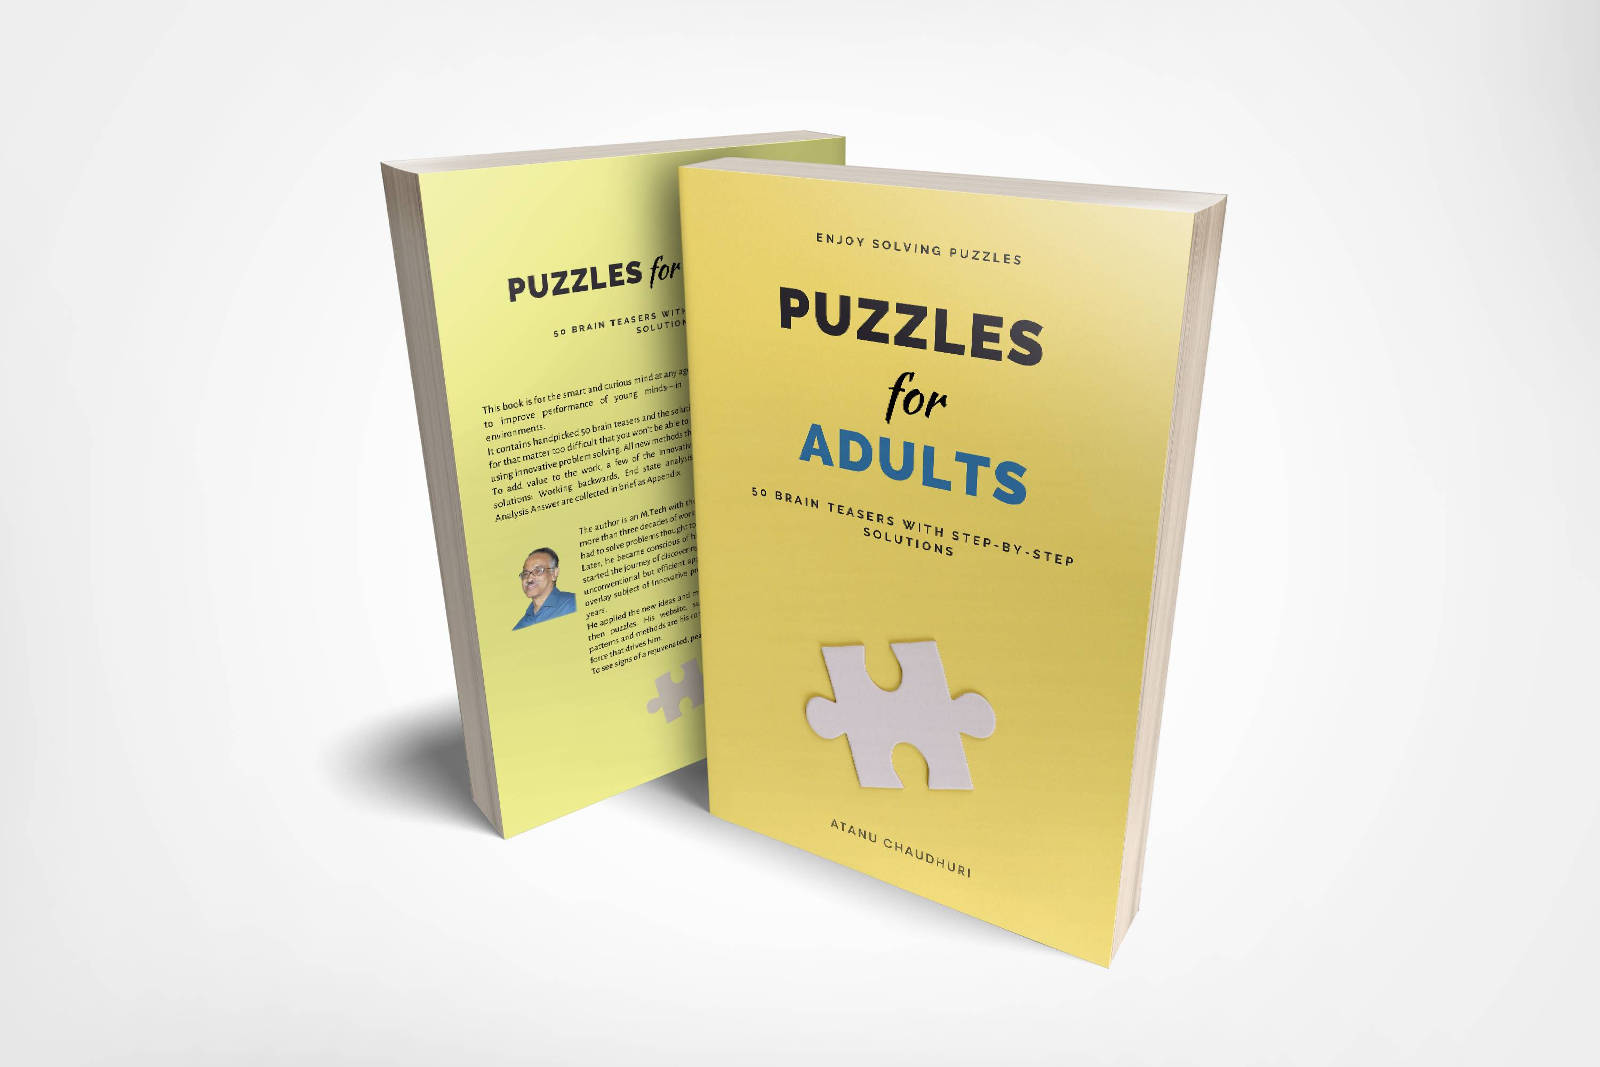 Puzzle book with innovative solutions